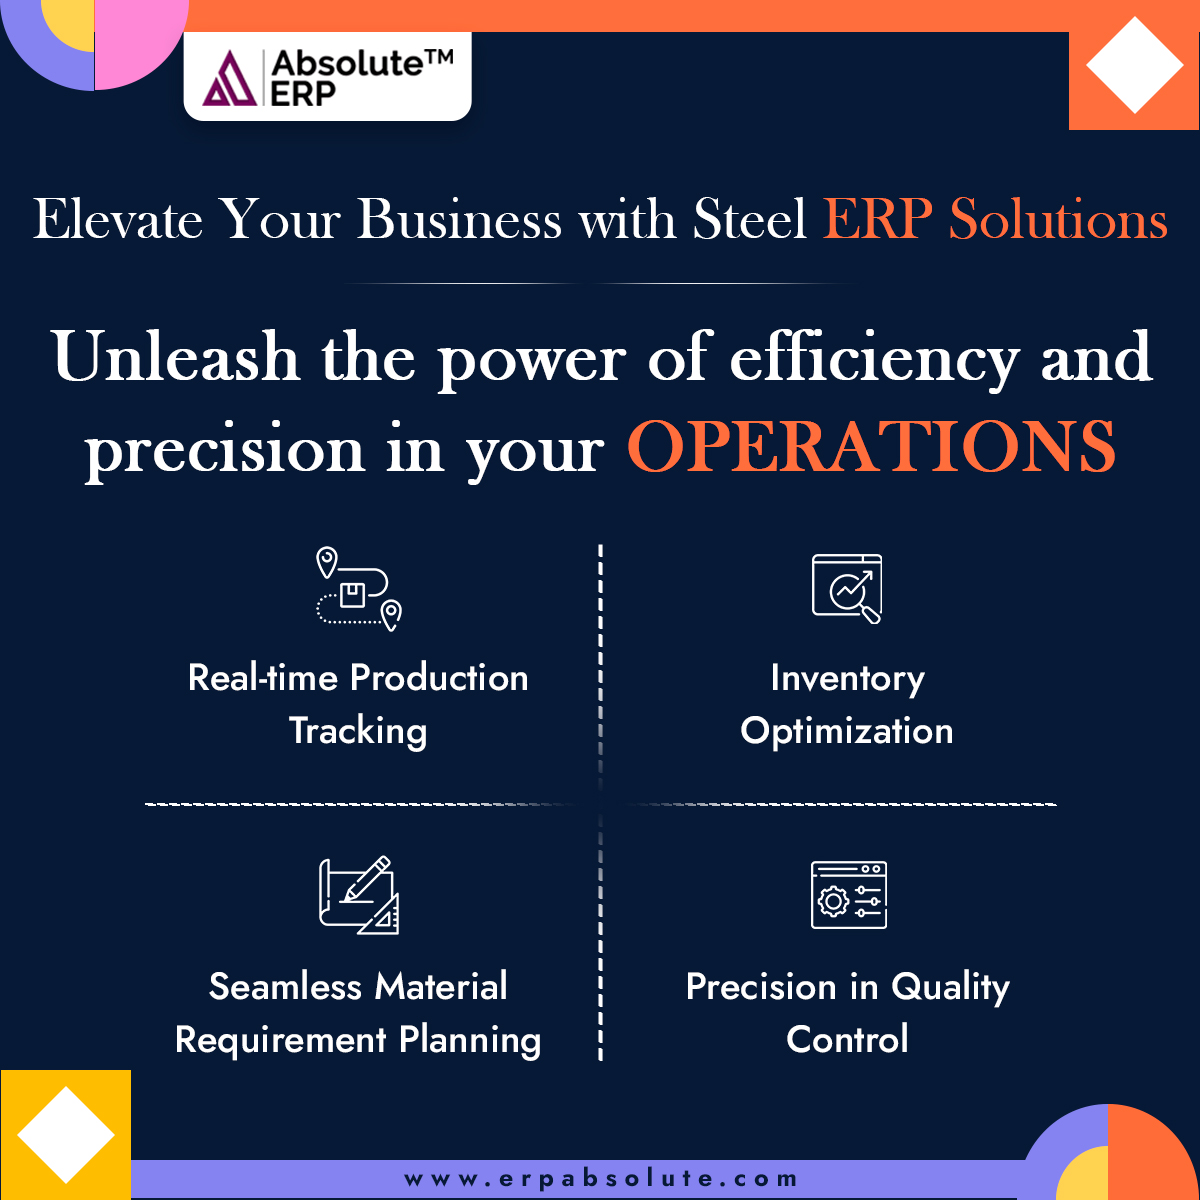 Stay ahead in the steel industry with modern ERP technology. Boost productivity, reduce costs, and forge a path to success! Read more- shorturl.at/EHI58
#steelindustry #ERPtechnology #erpsystems #costs #success #steelerpsolutions #manufacturingerp #power #steelindustryerp